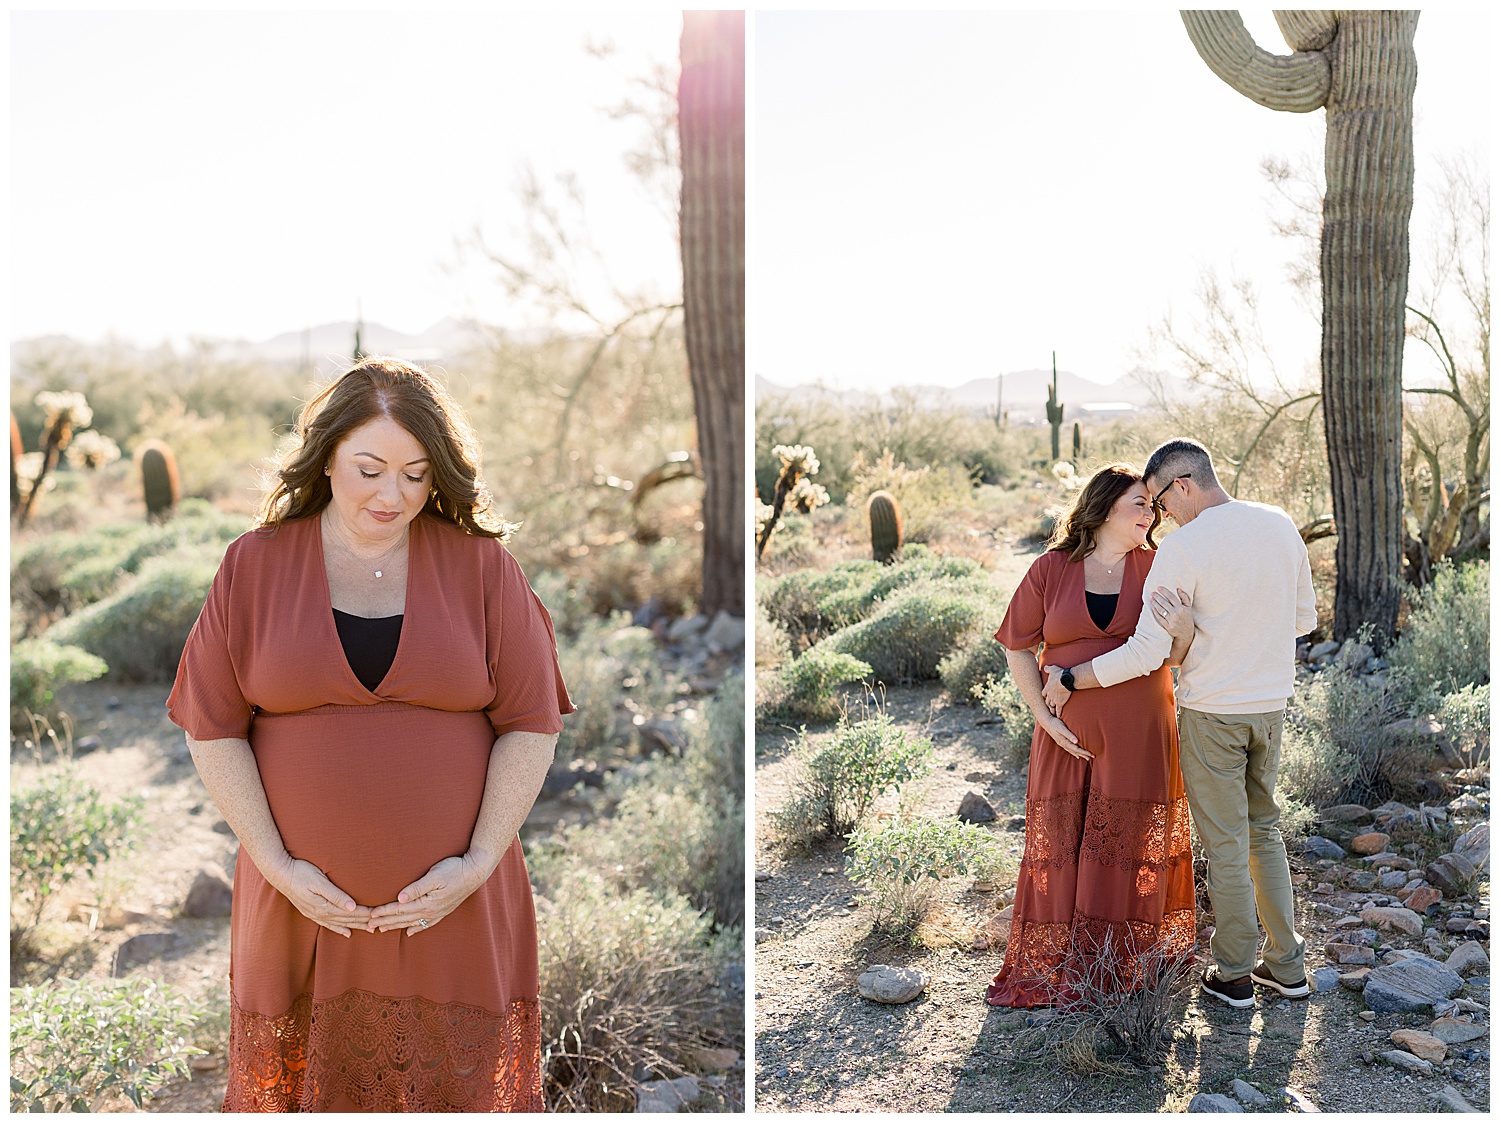 Rust and Neutral Color Palette for Scottsdale Desert Maternity Photos, Arizona Maternity Photographer